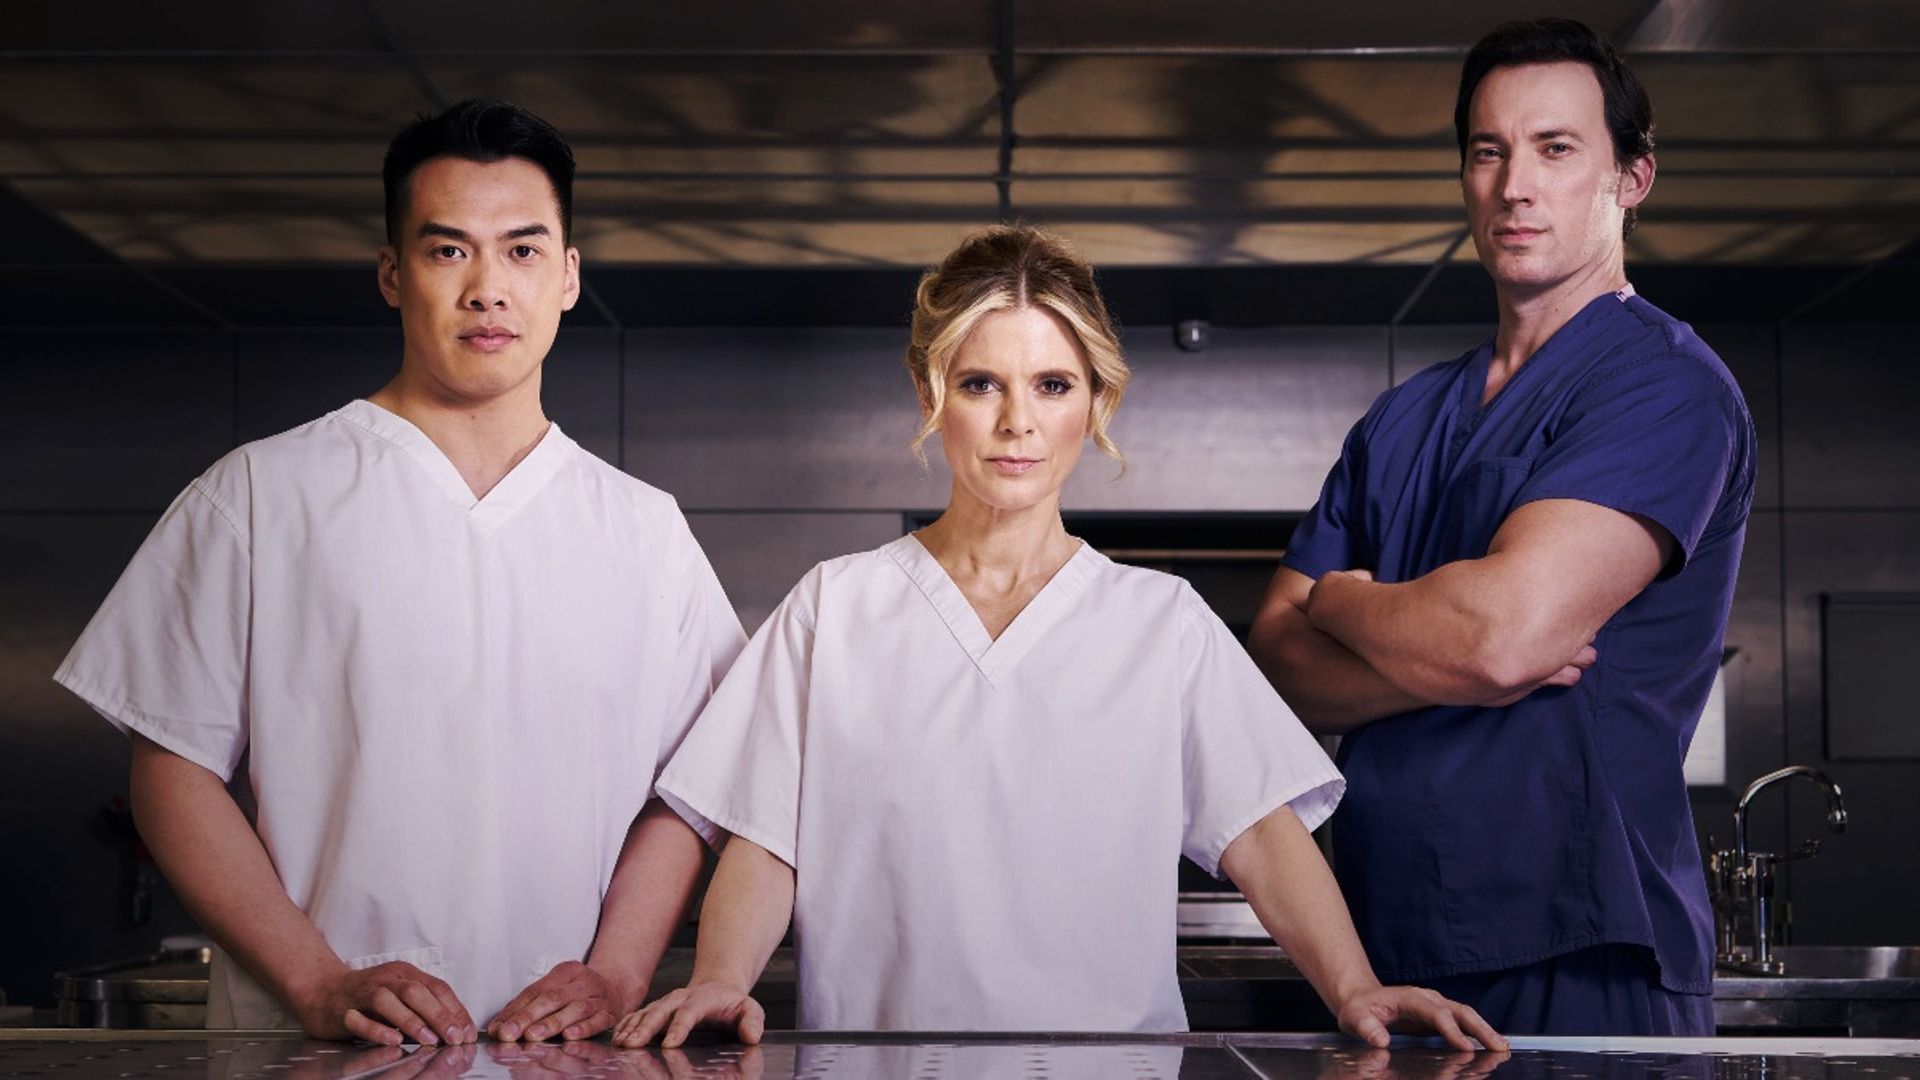 Silent Witness teases rocky relationship for Nikki and Jack in new season 25 trailer